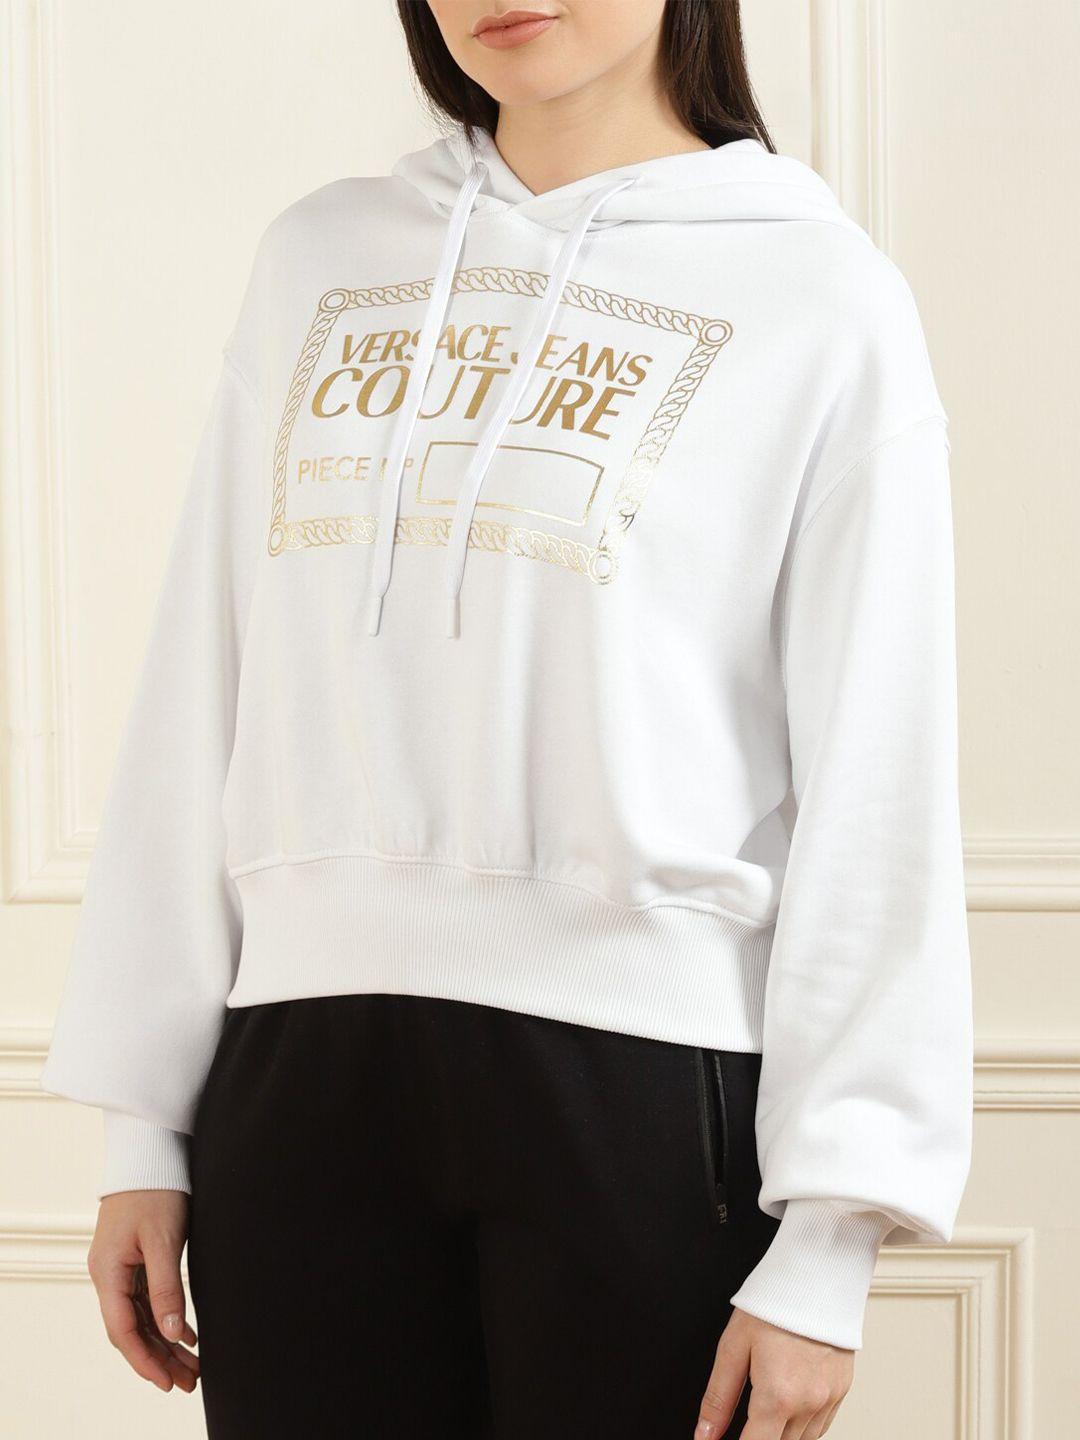 versace jeans couture women white vjc brand printed hooded pure cotton sweatshirt